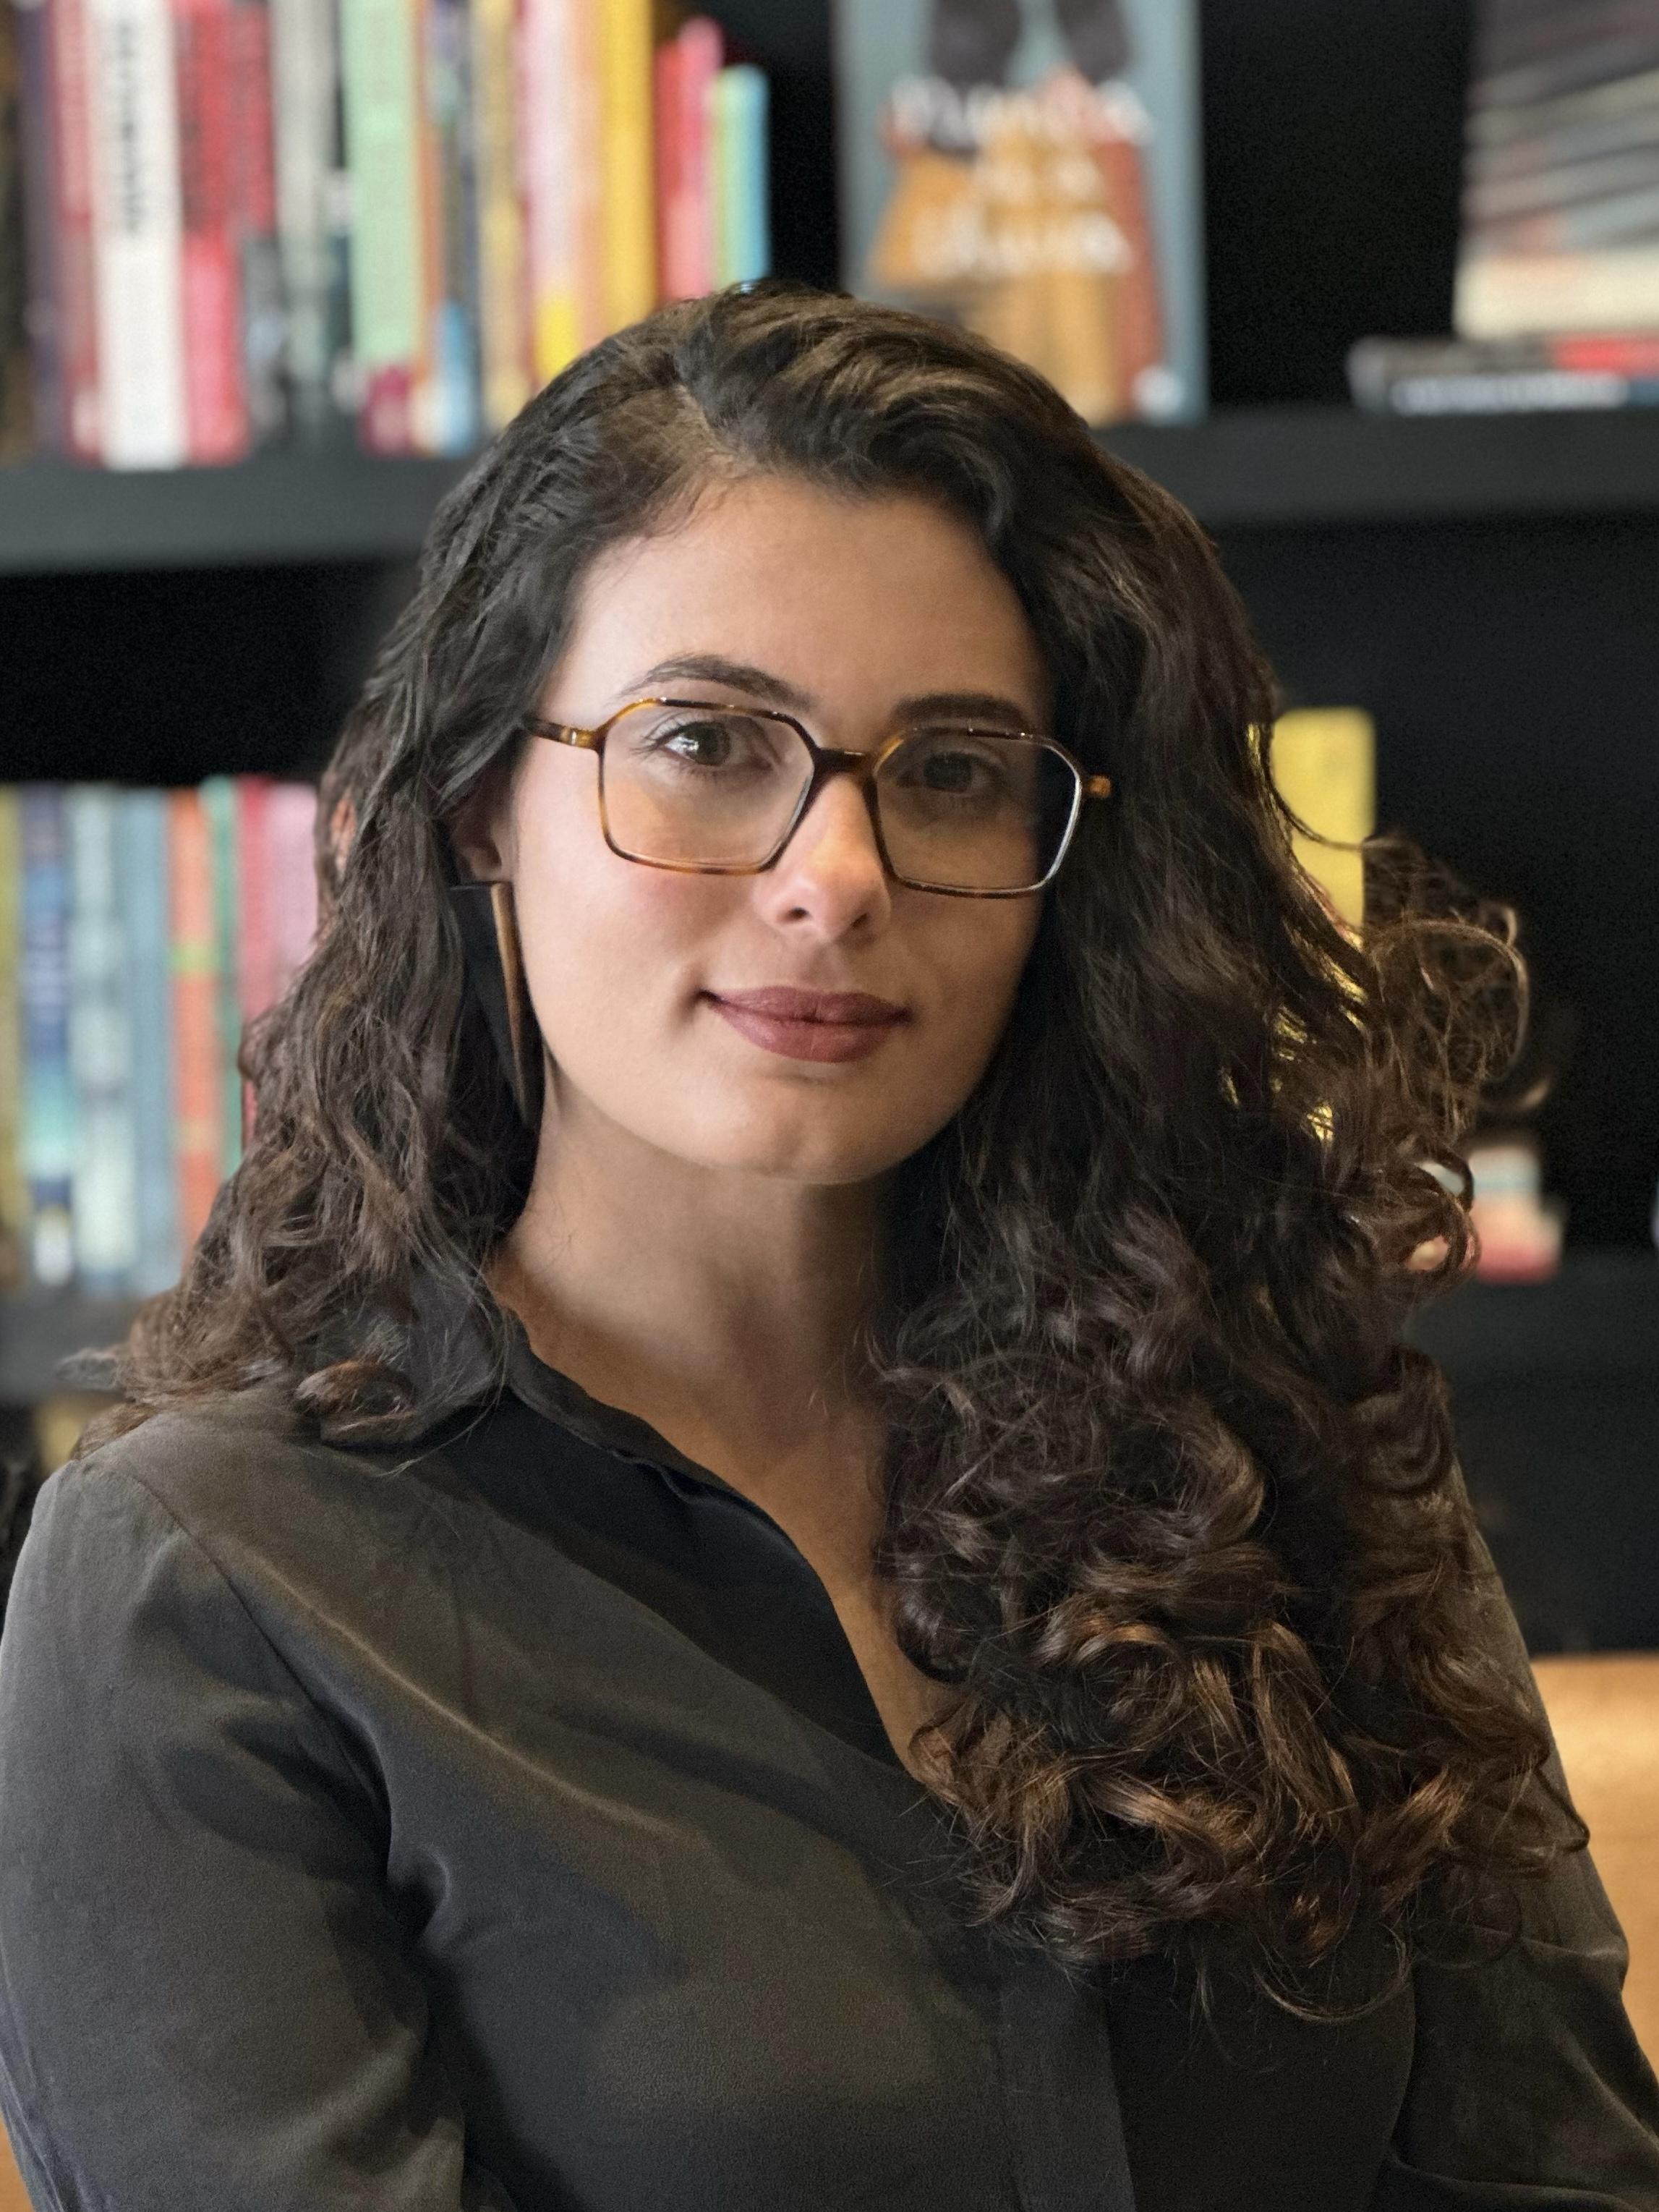 Júlia Martins Rodrigues wearing glasses and has curly hair while sitting in front of a bookshelf.